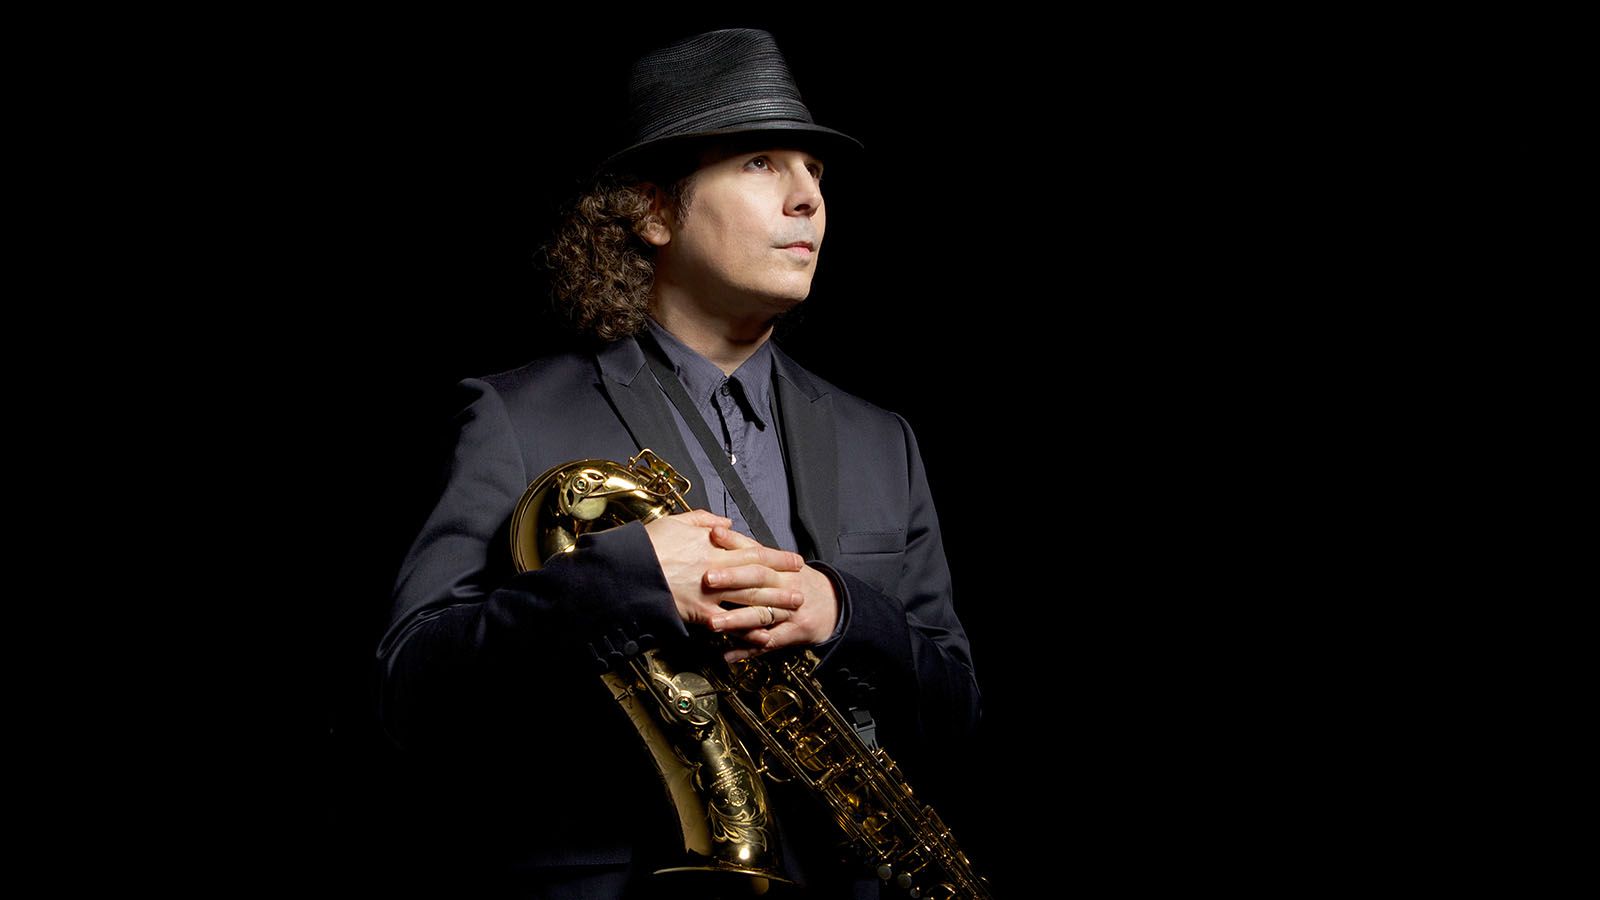 Boney James will be at The Clyde Theatre on Friday, Feb. 17.